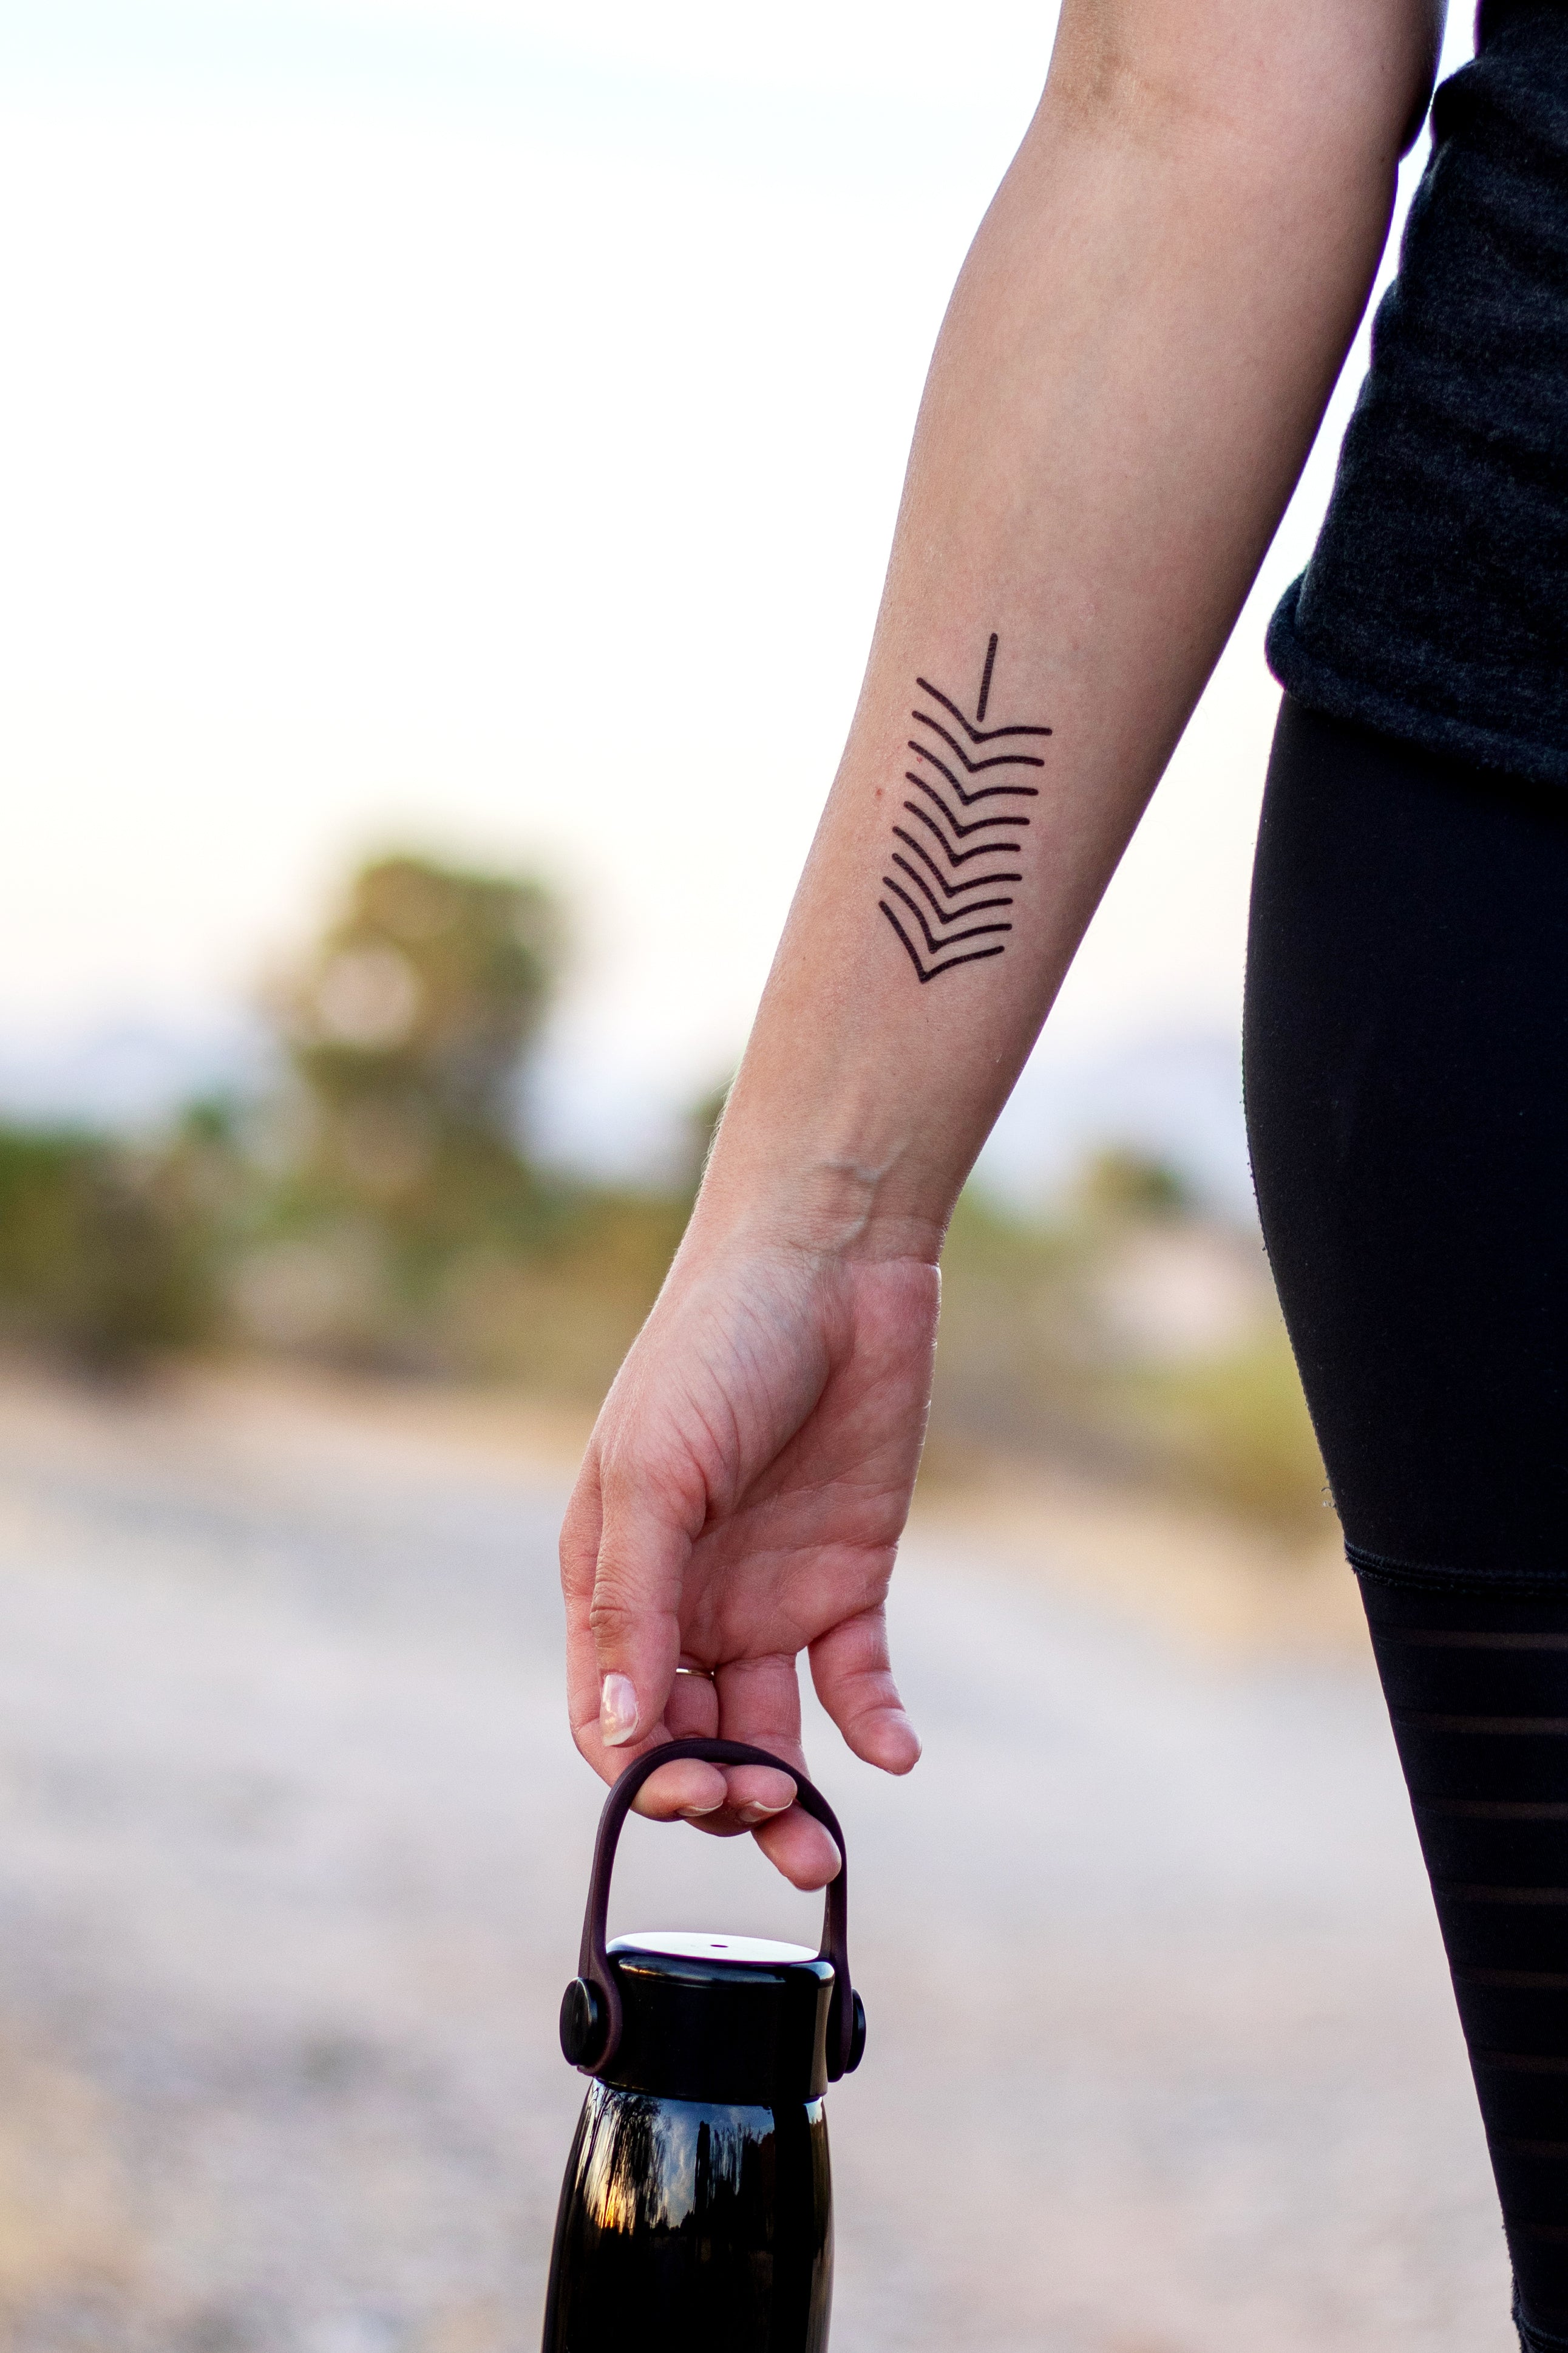 846 Likes, 2 Comments - Tattoos 1960 👁️⃤ (@tattoos1960) on Instagram:  “Abstract armband with chevron pattern We thrive t… | Tattoos, Tattoo  studio, Chevron pattern